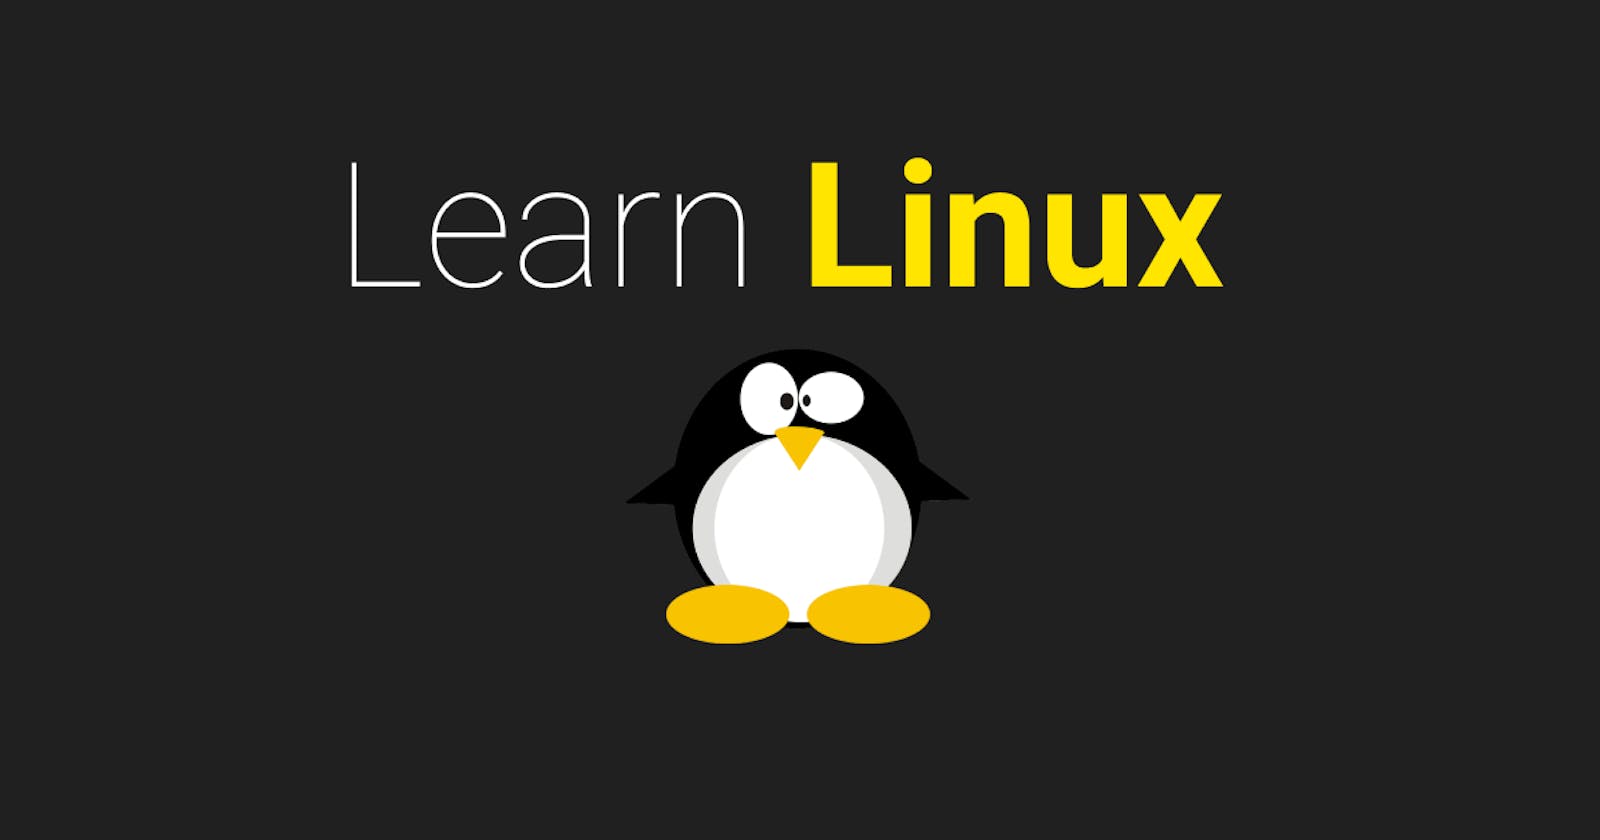 6 Linux Commands Every Beginner Should Know